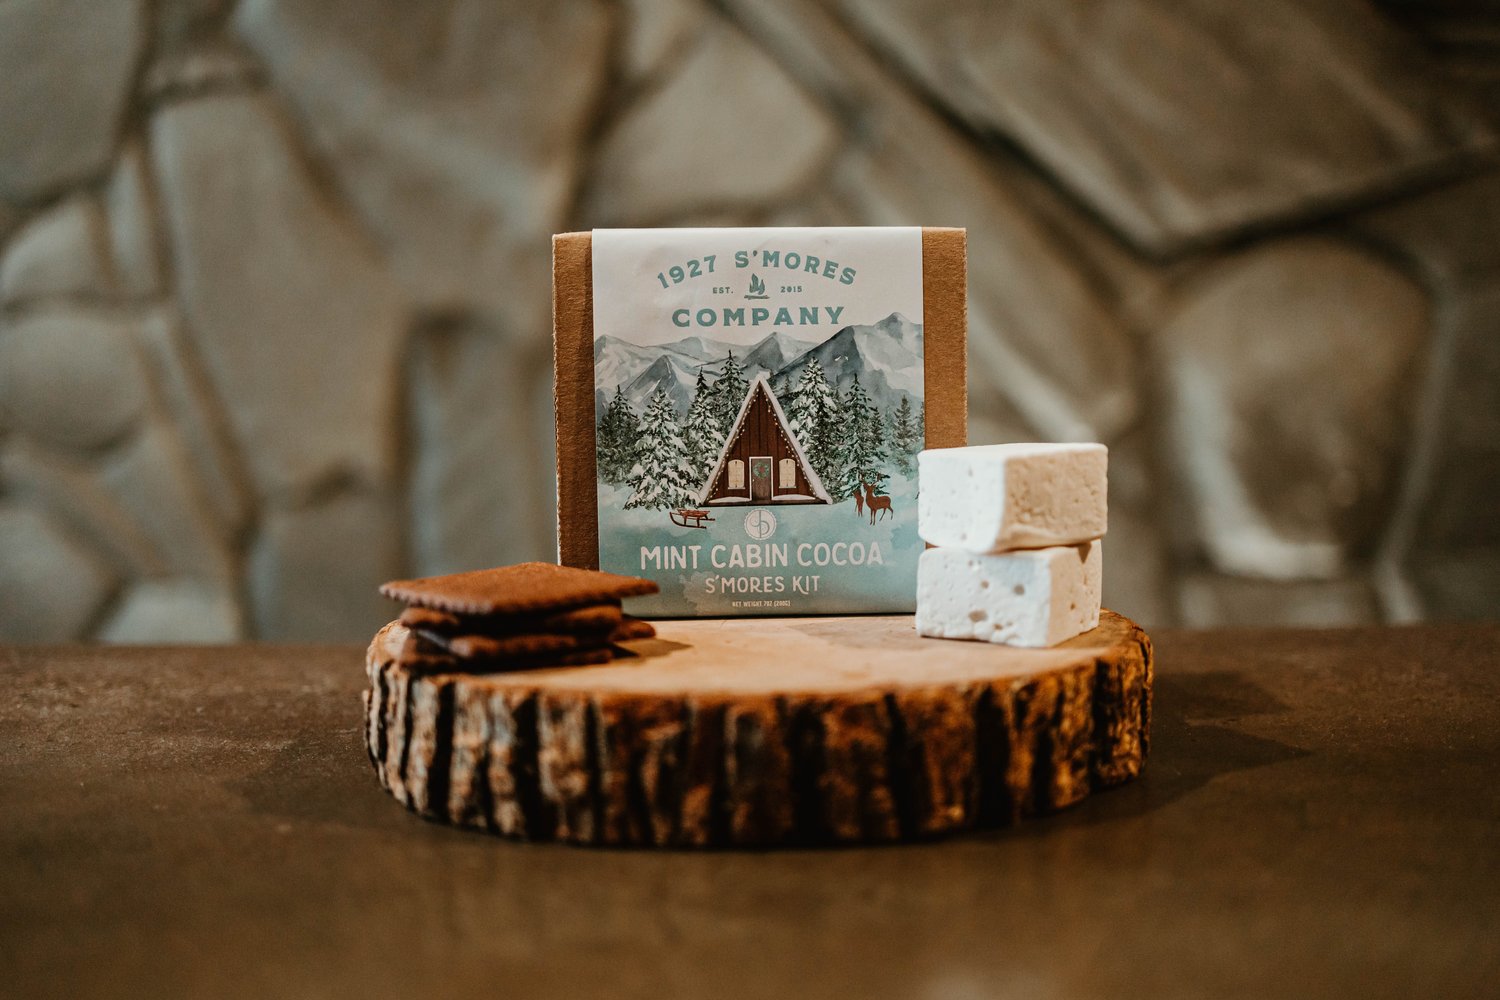 1927 S'Mores Company - Mint Cabin Cocoa S'mores Kit